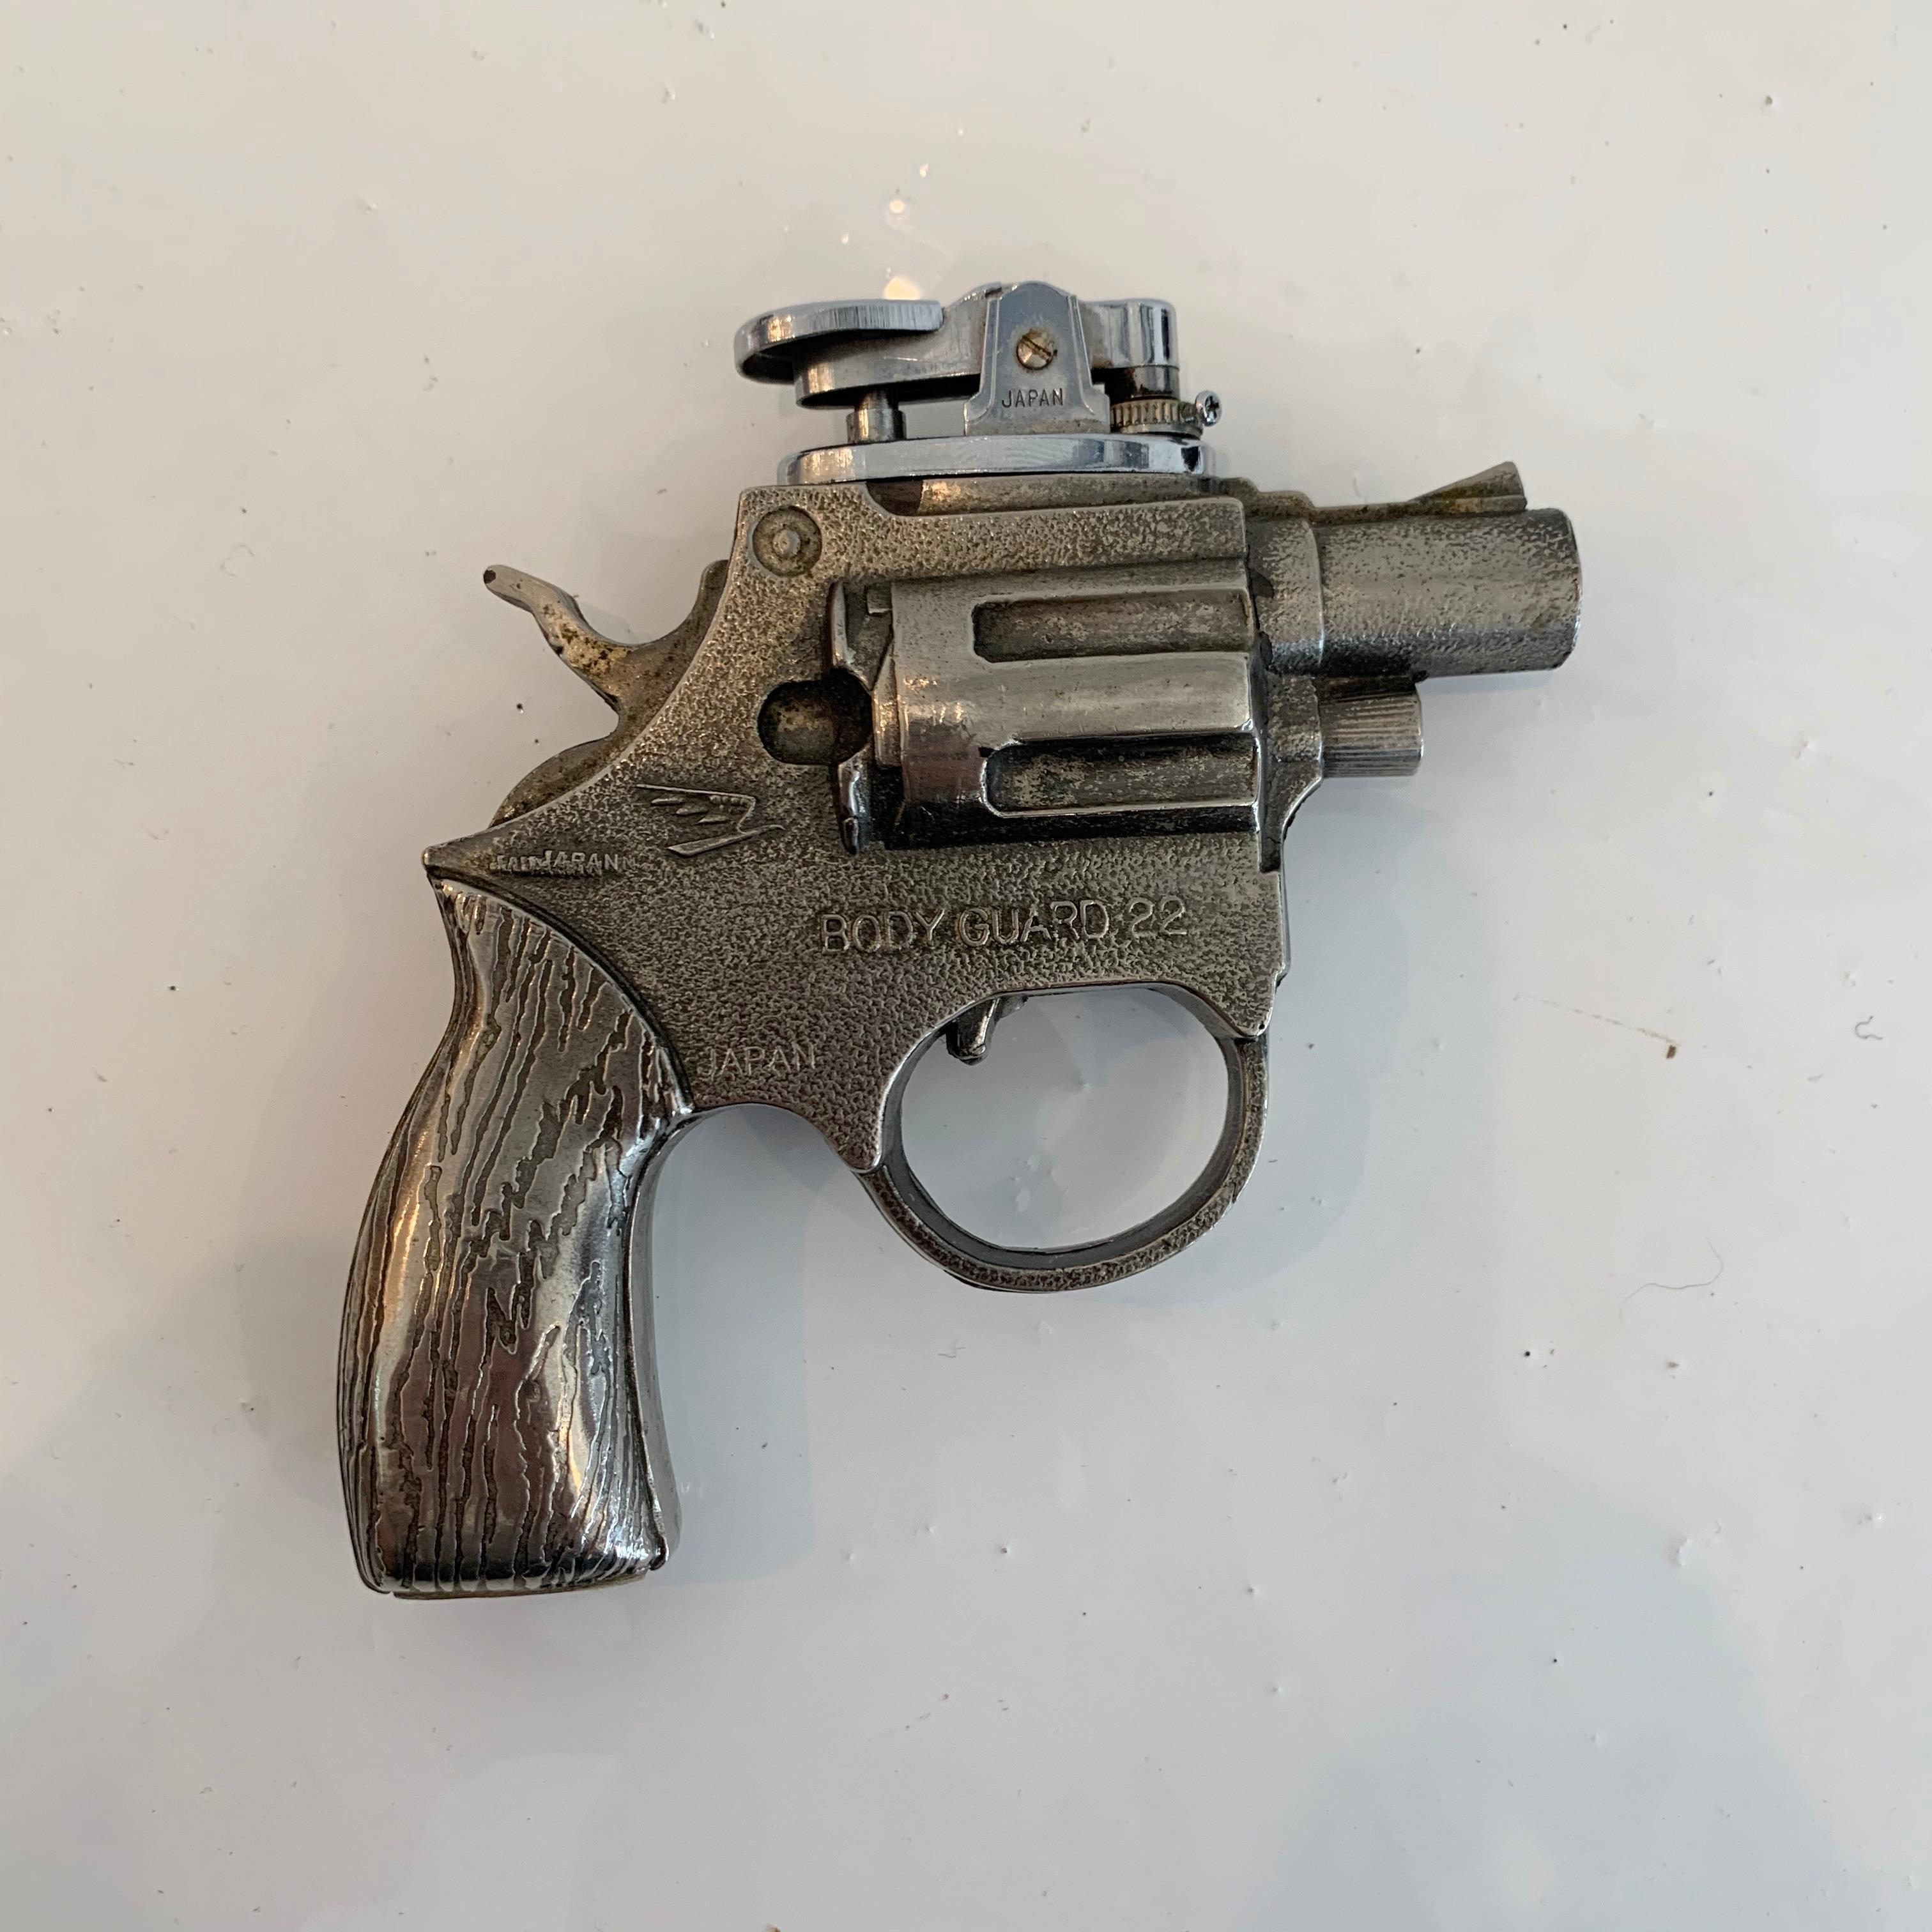 Cool vintage table lighter in the shape of a handgun. Handgun is a body guard 22 revolver. Made of metal. Made in Japan. Good working condition. Great object.

  